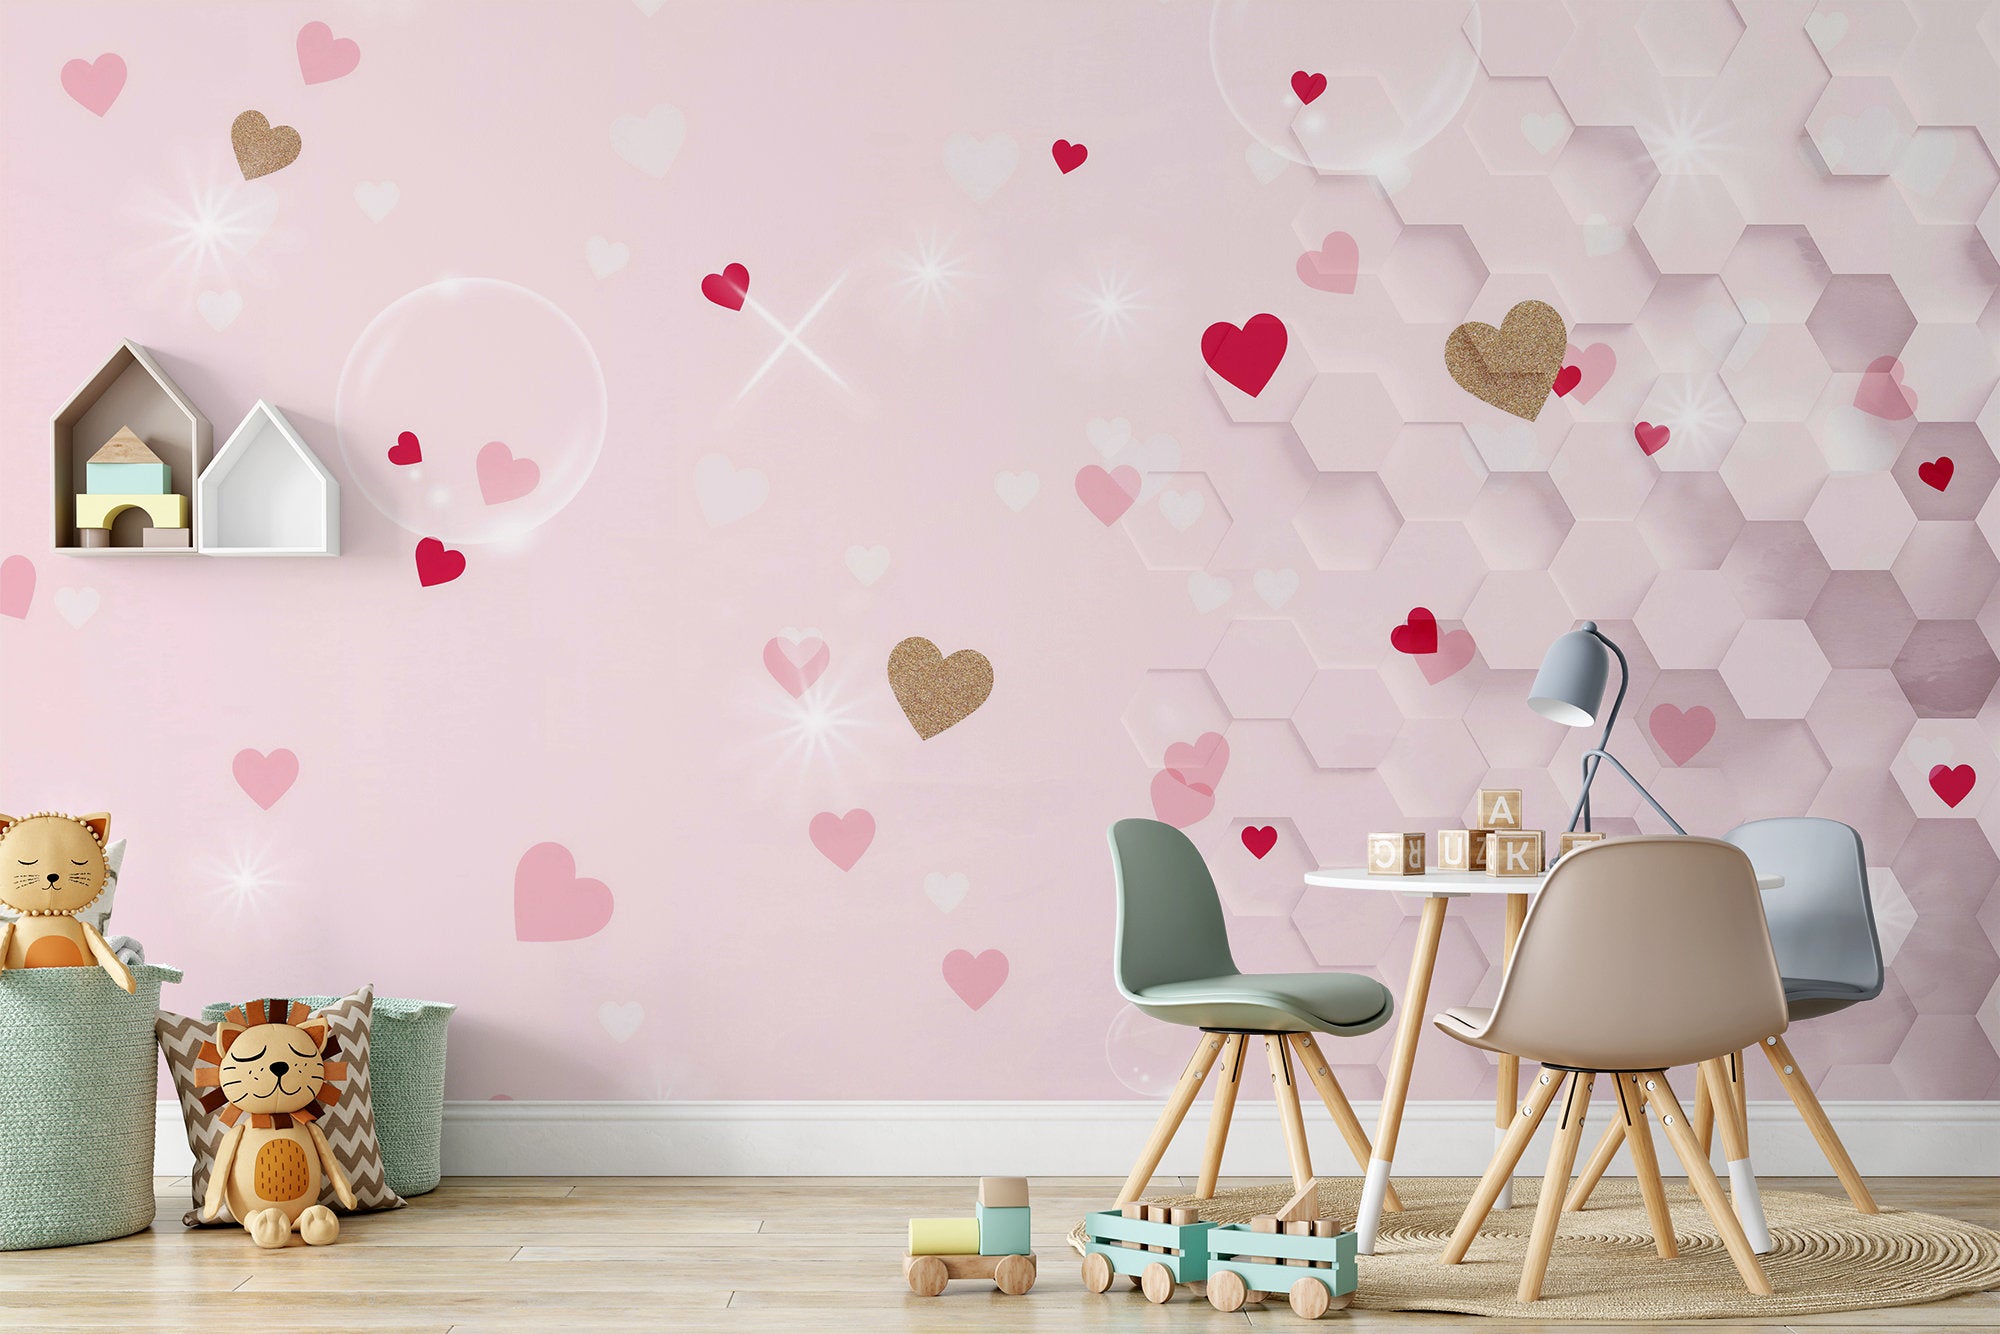 Heart Star Simple Abstract Hexagons Patterns on Pink Background Wallpaper Children Kids Room Bedroom Mural Home Decor Wall Art